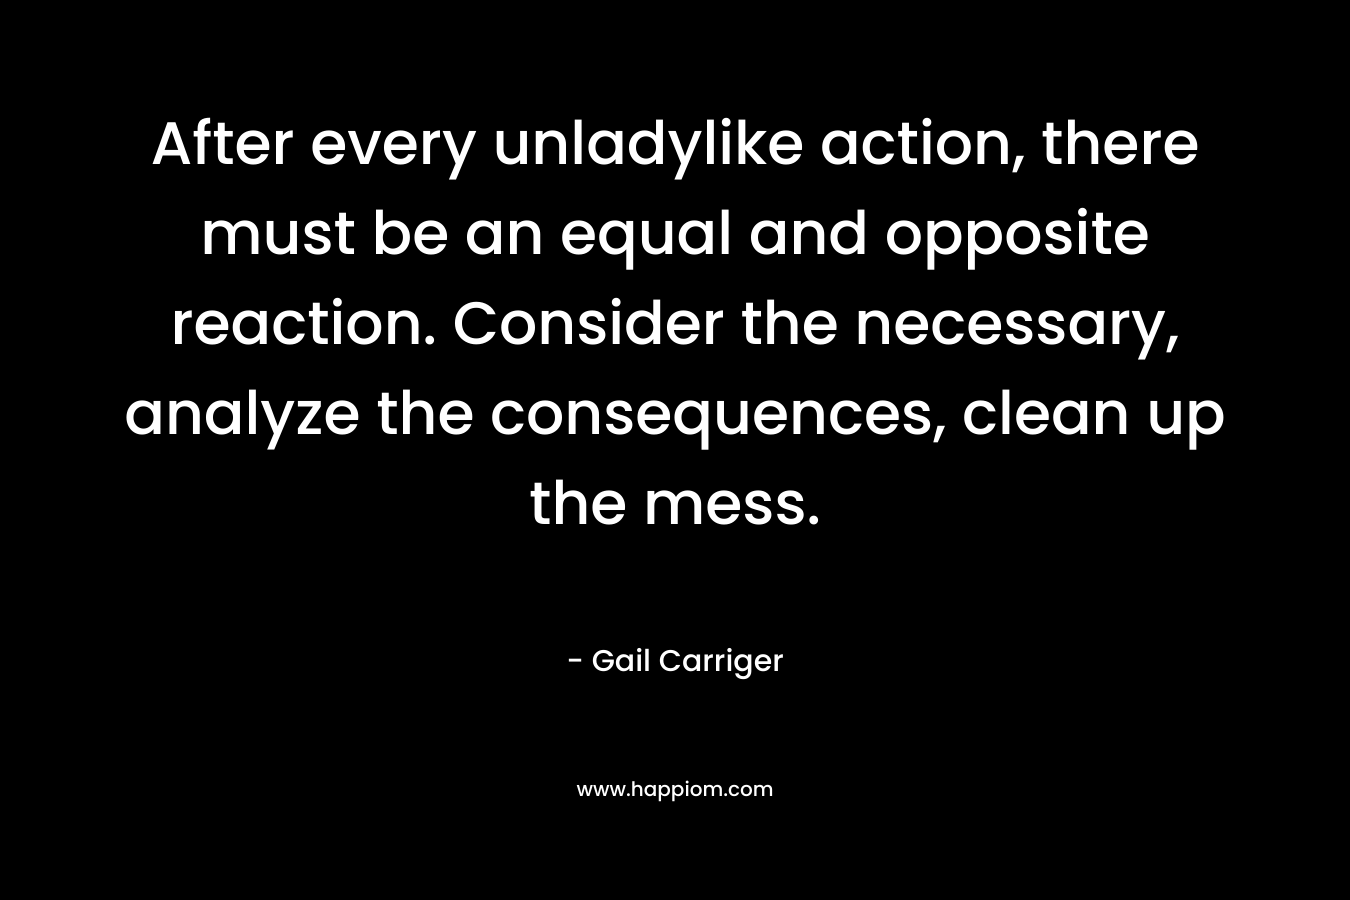 After every unladylike action, there must be an equal and opposite reaction. Consider the necessary, analyze the consequences, clean up the mess. – Gail Carriger